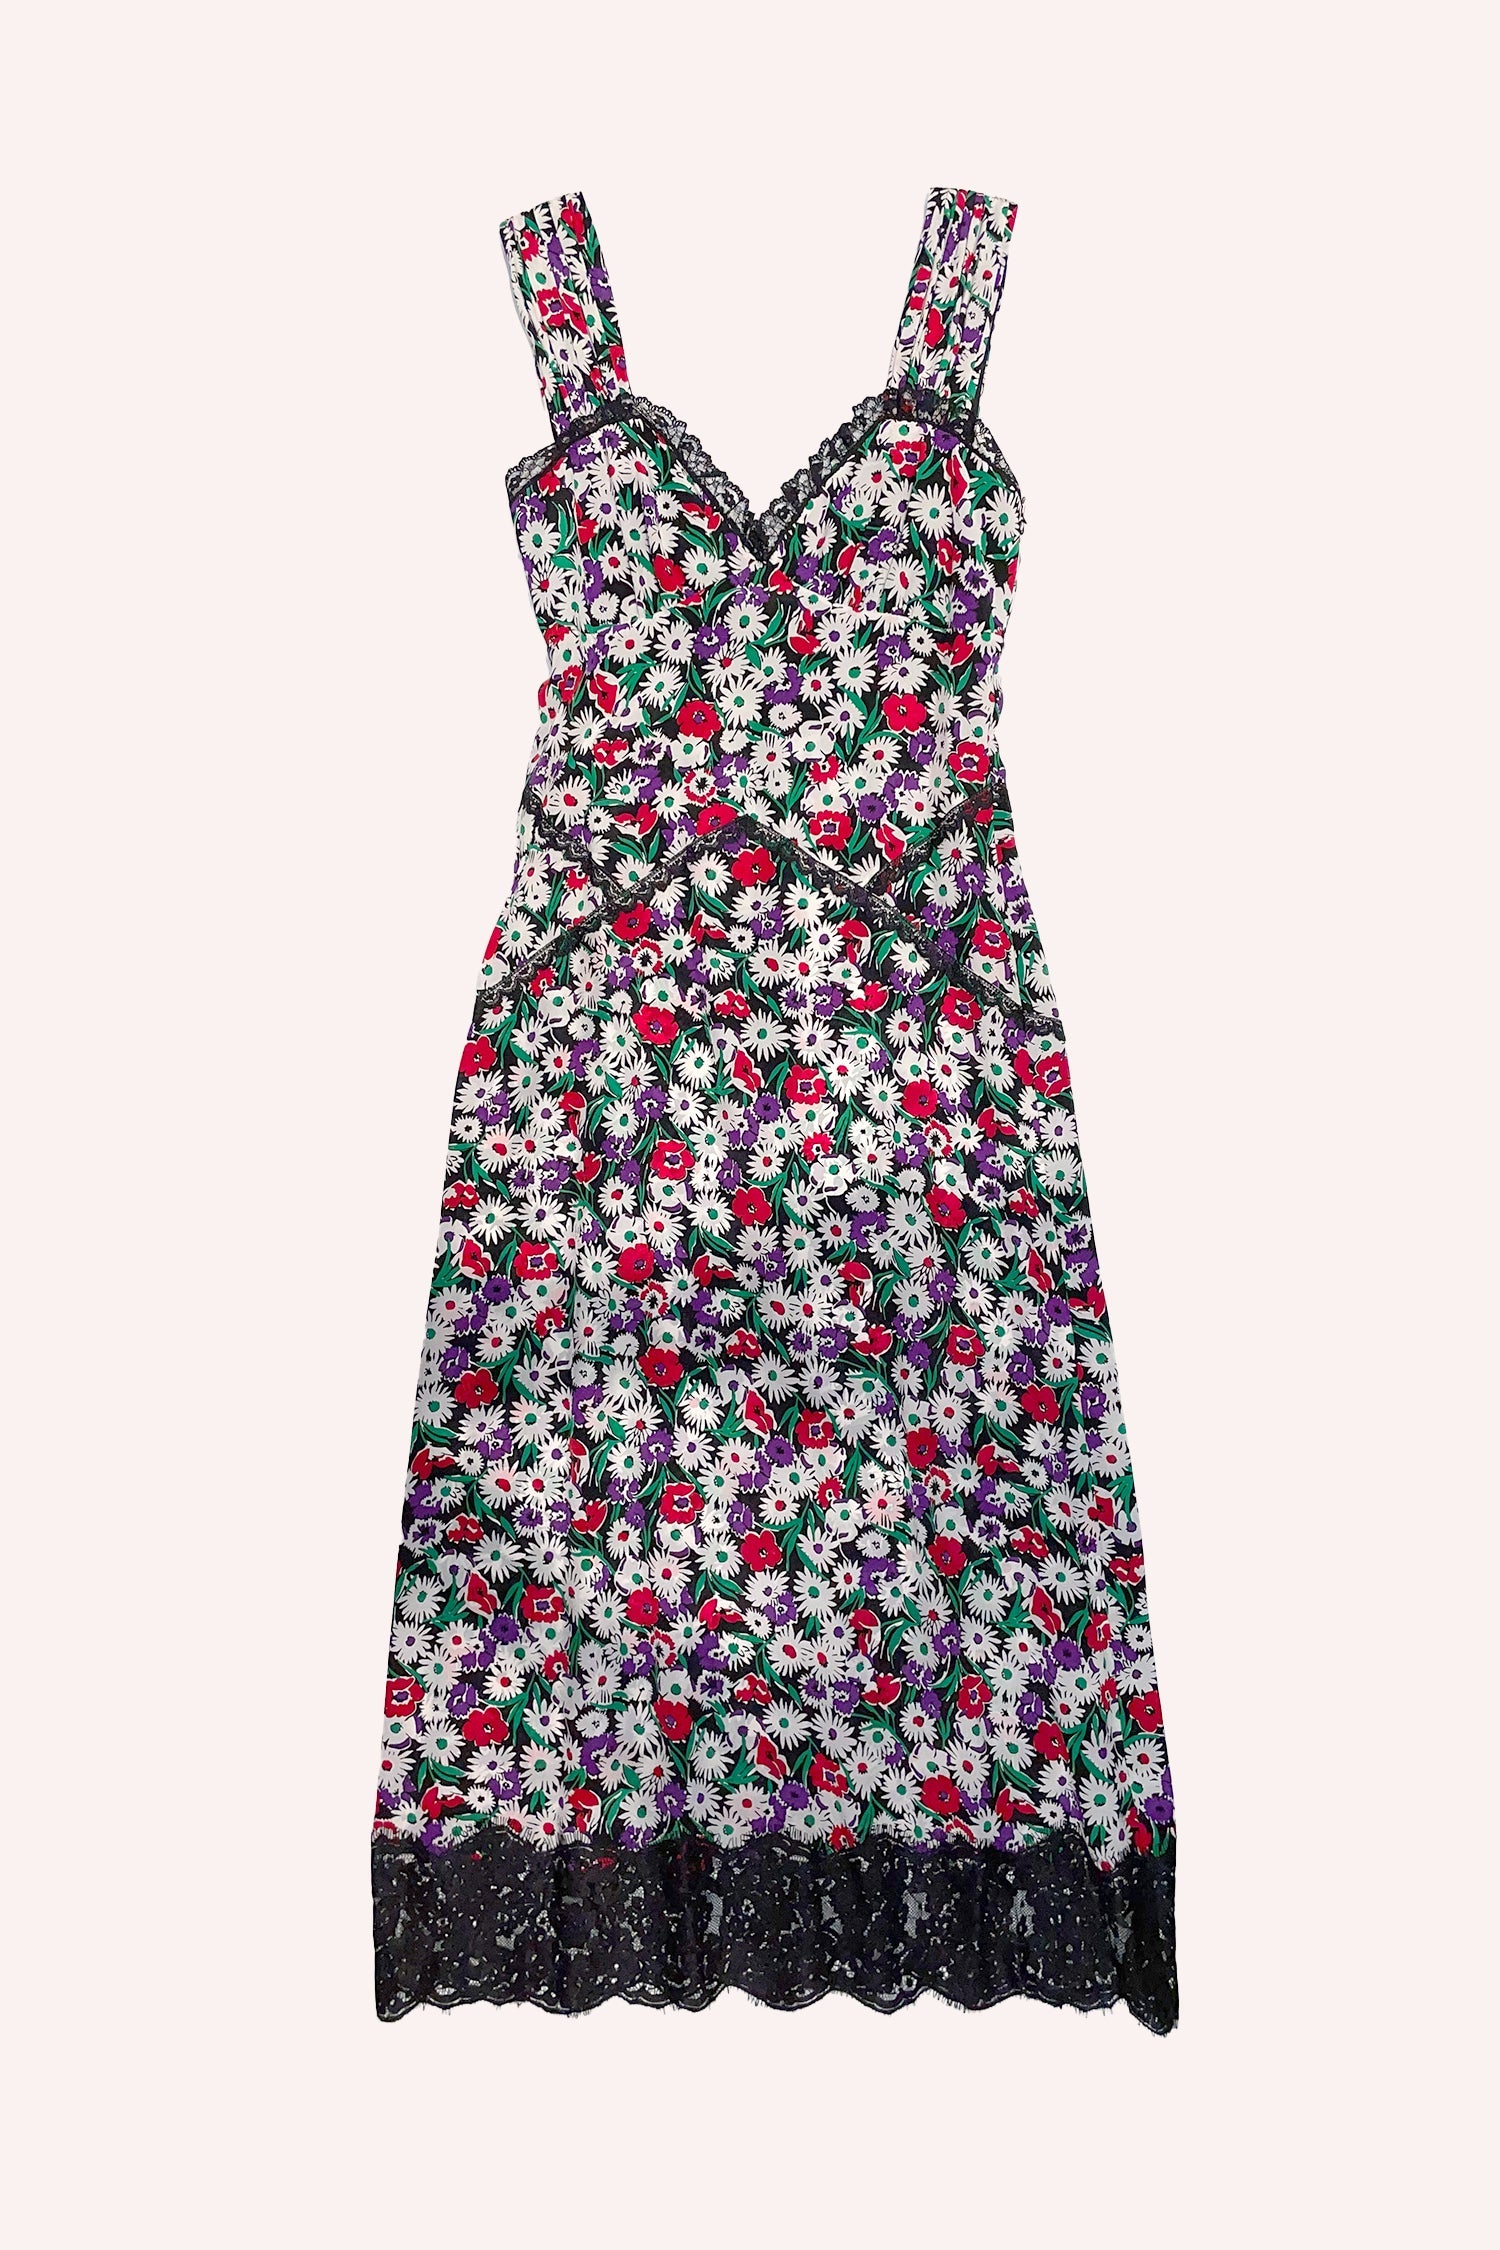 Daisies Dress Rouge is mini, sleeveless, pattern of white daisies with green leaves and red spots